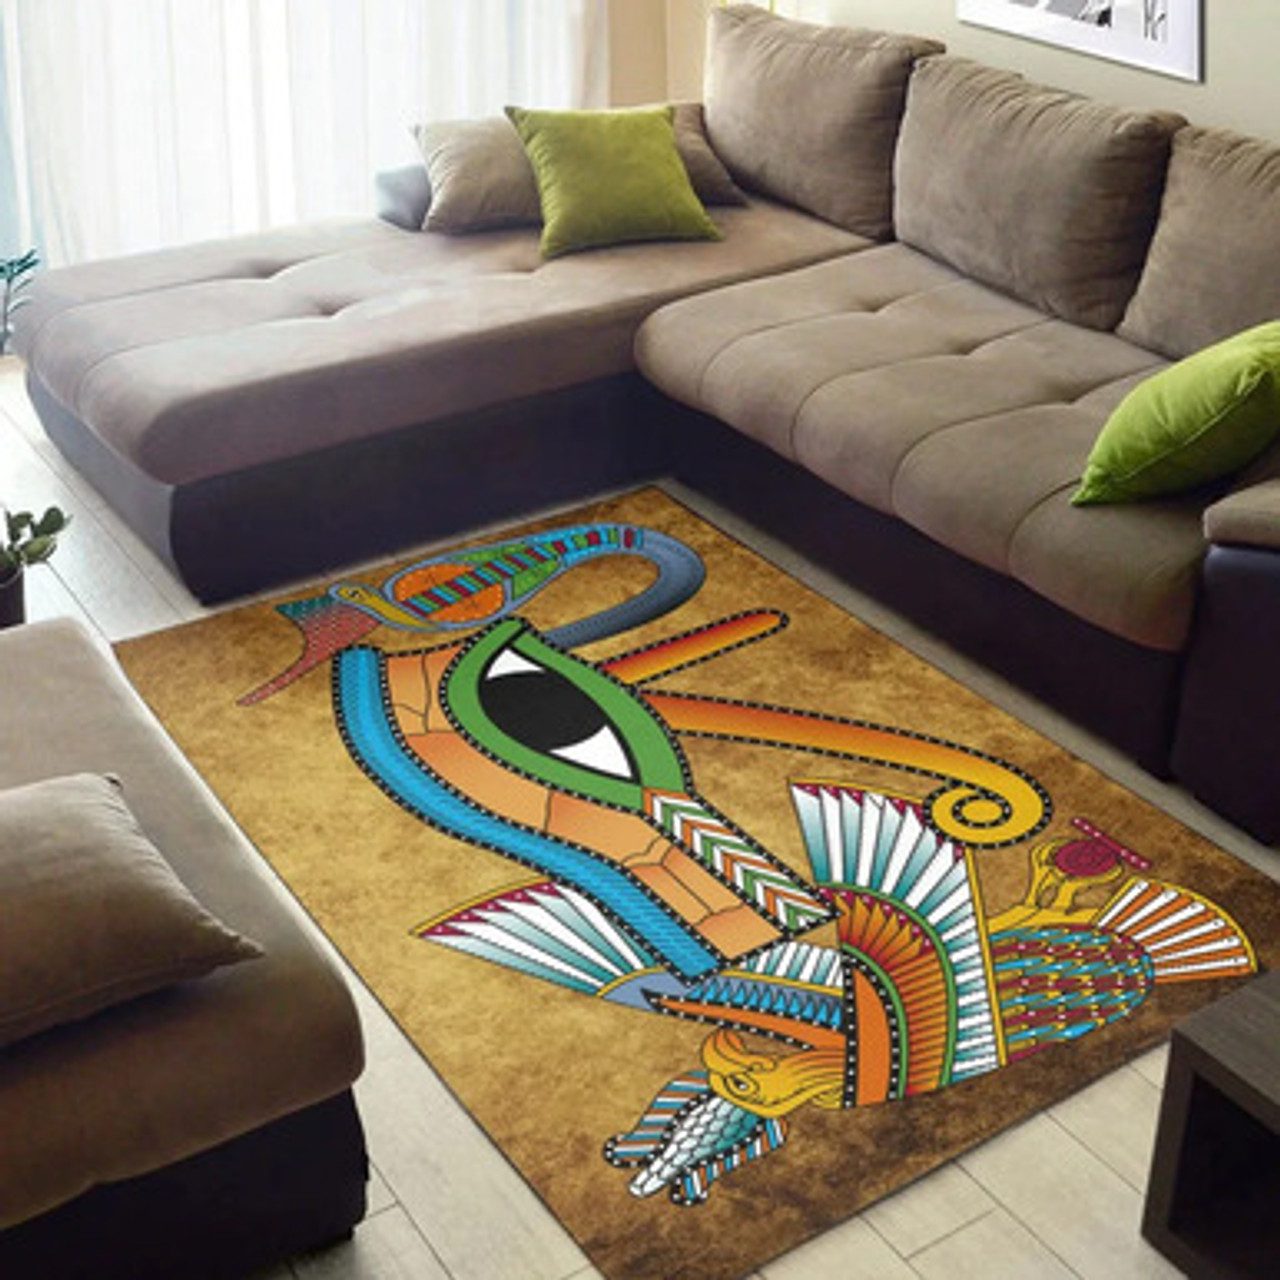 Egyptian Area Rug – African Patterns Egyptian Hieroglyphics and Gods Self Knowledge Area Rug